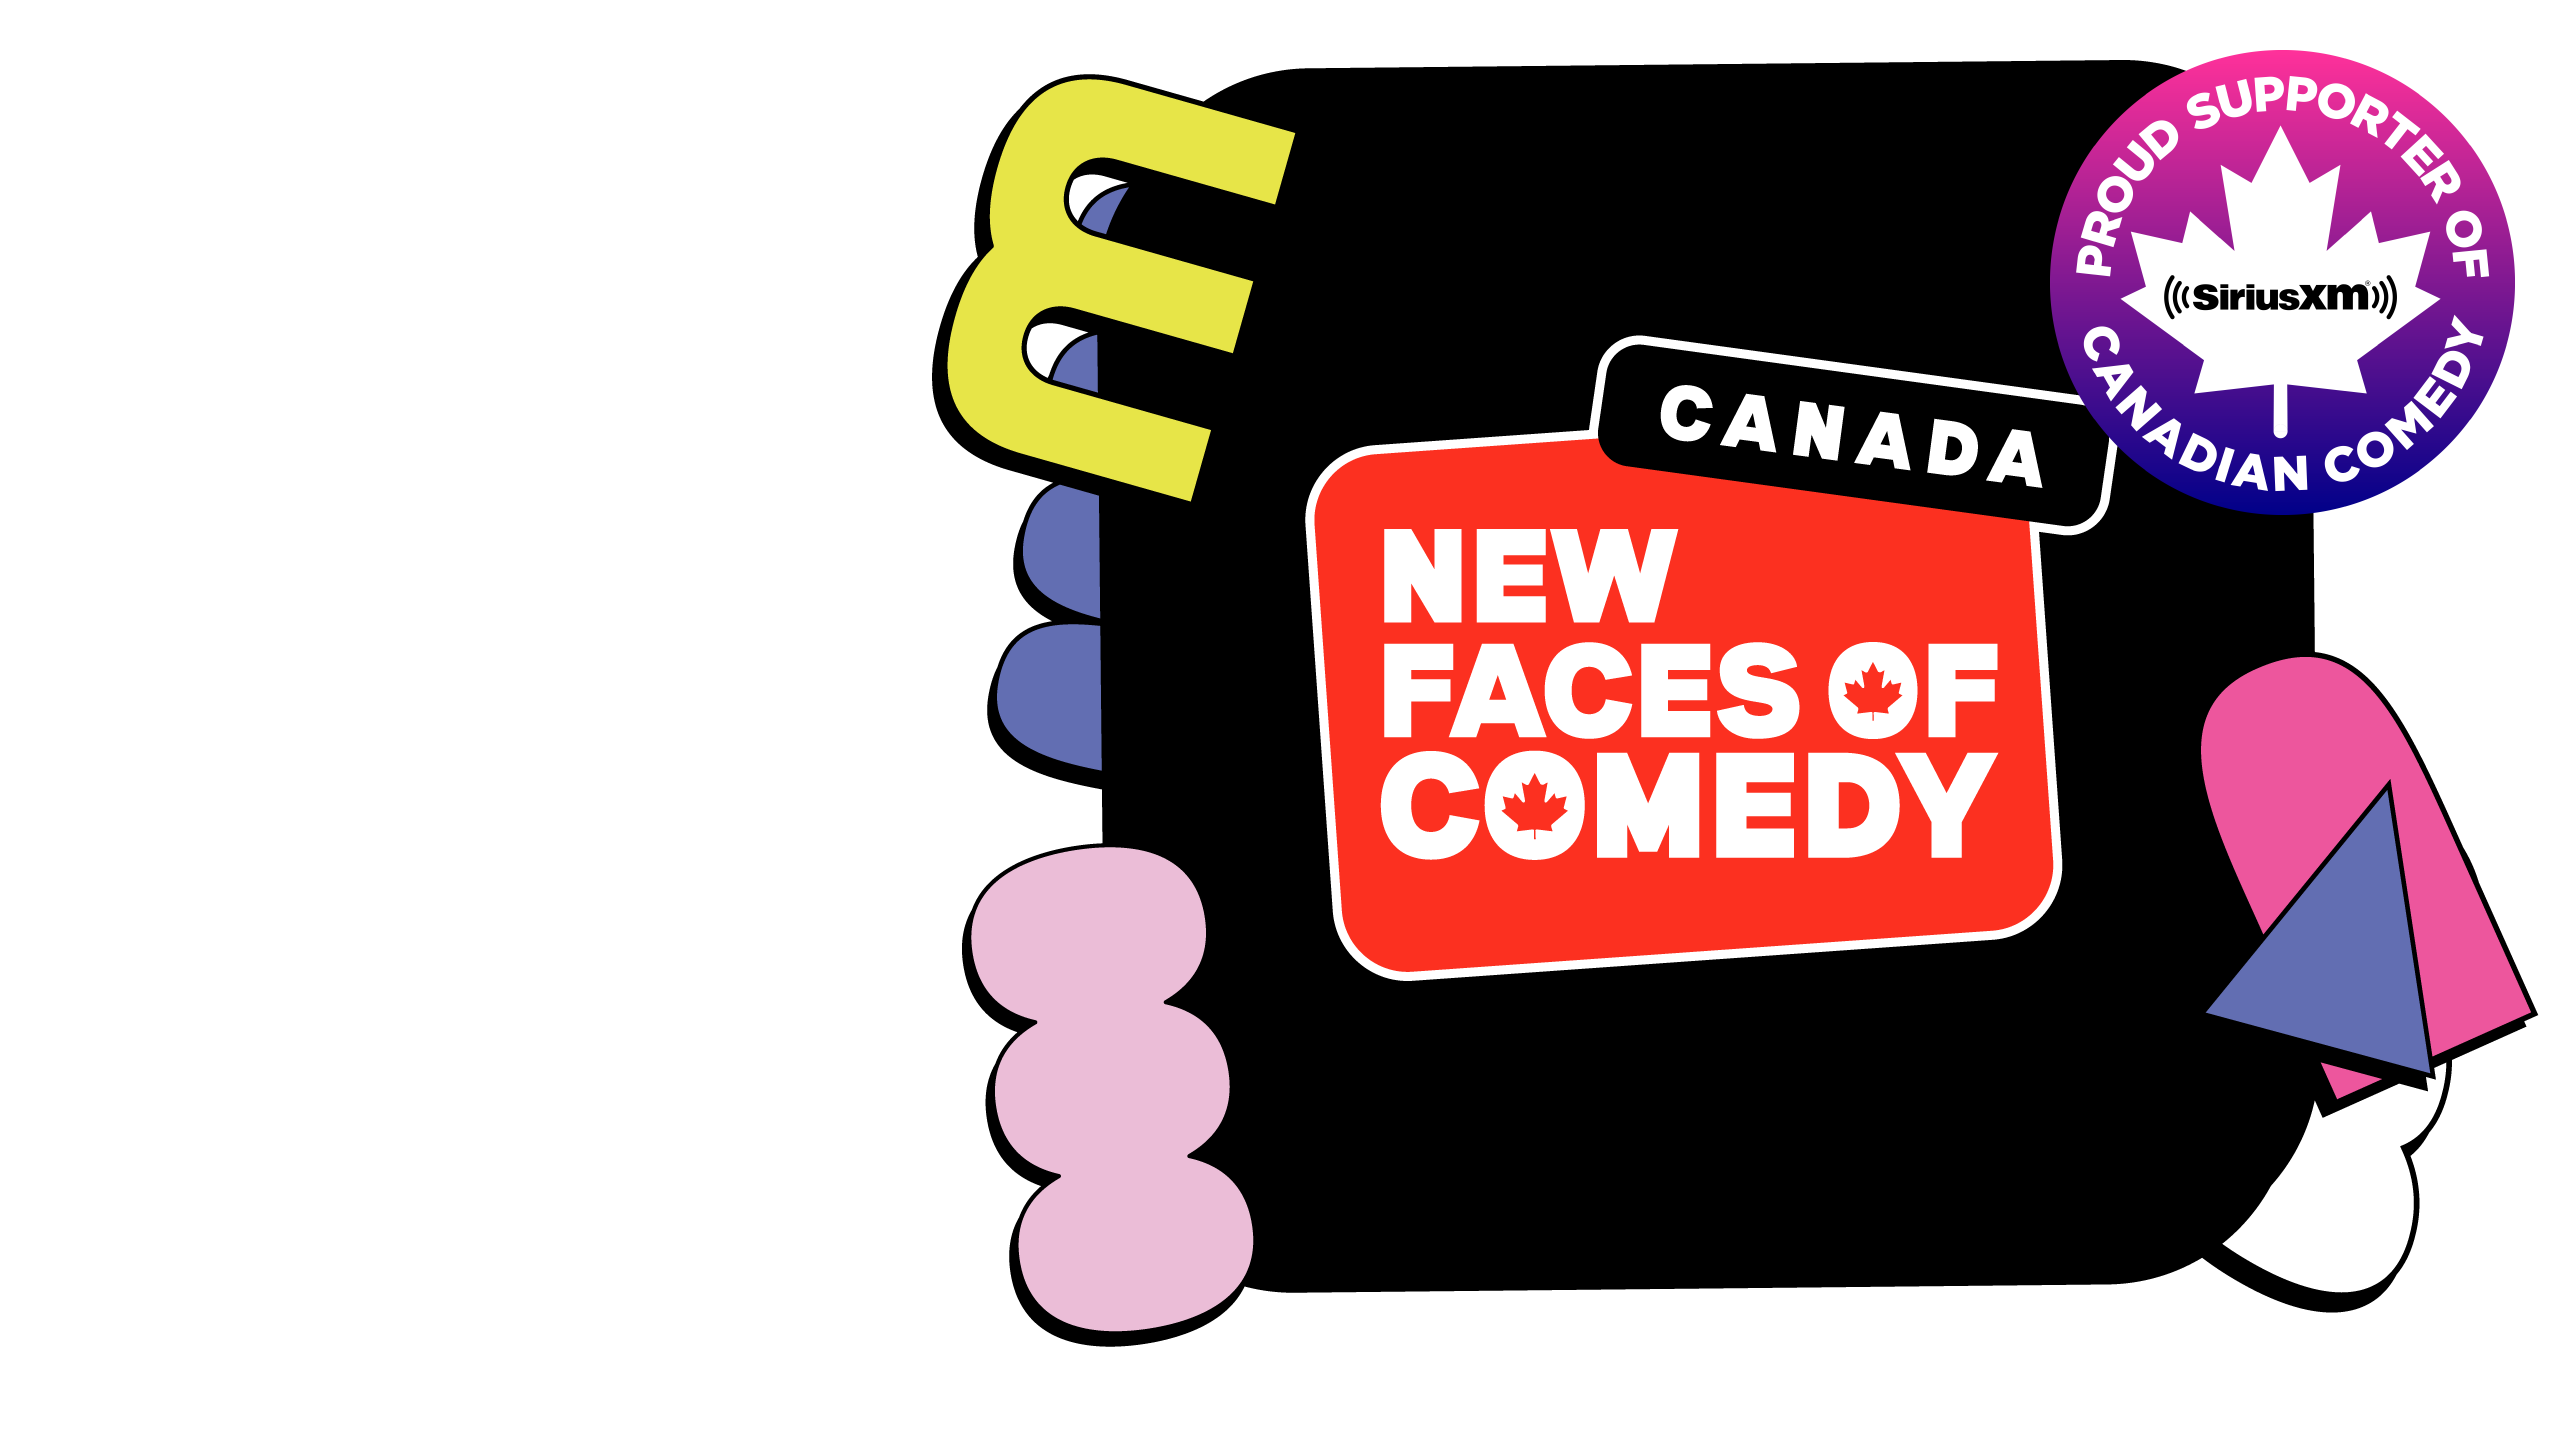 Promotional image for New Faces of Comedy: Canada